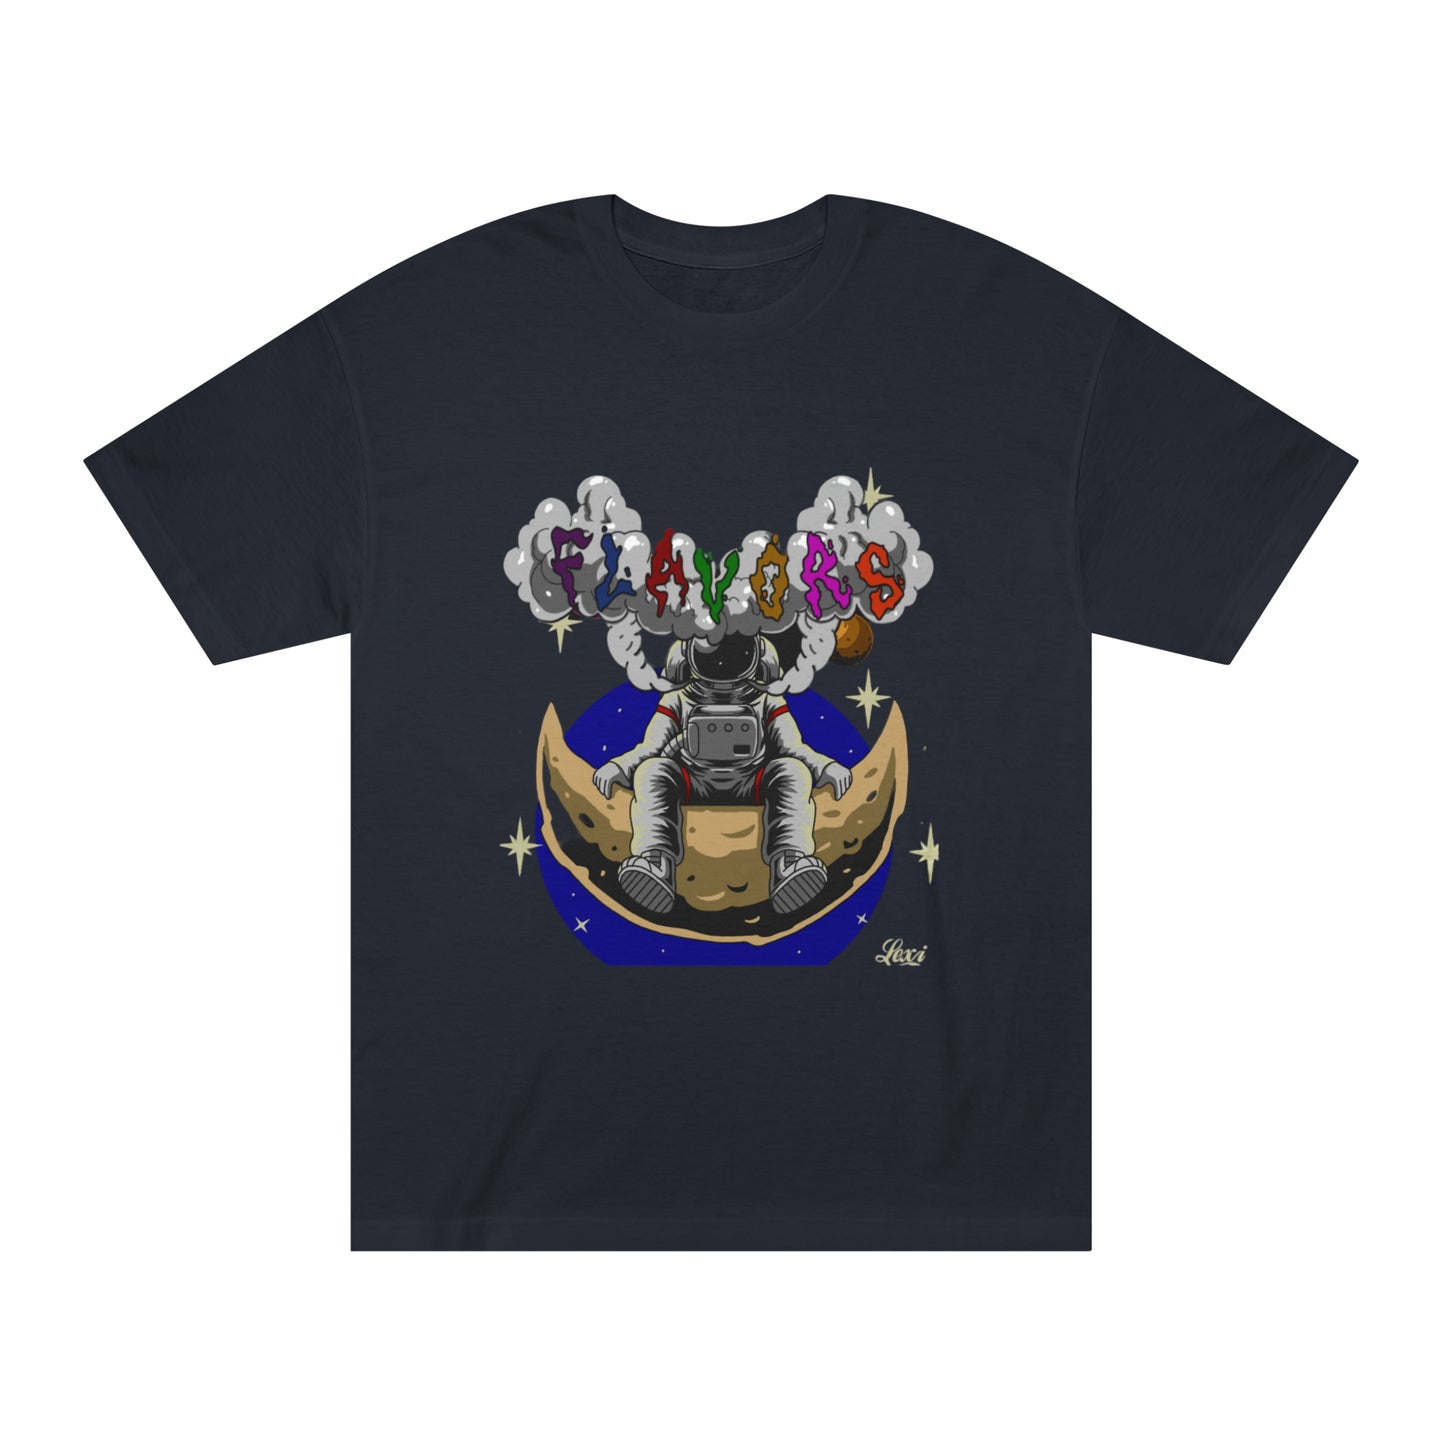 Flavor's Spaceman Graphic Tee